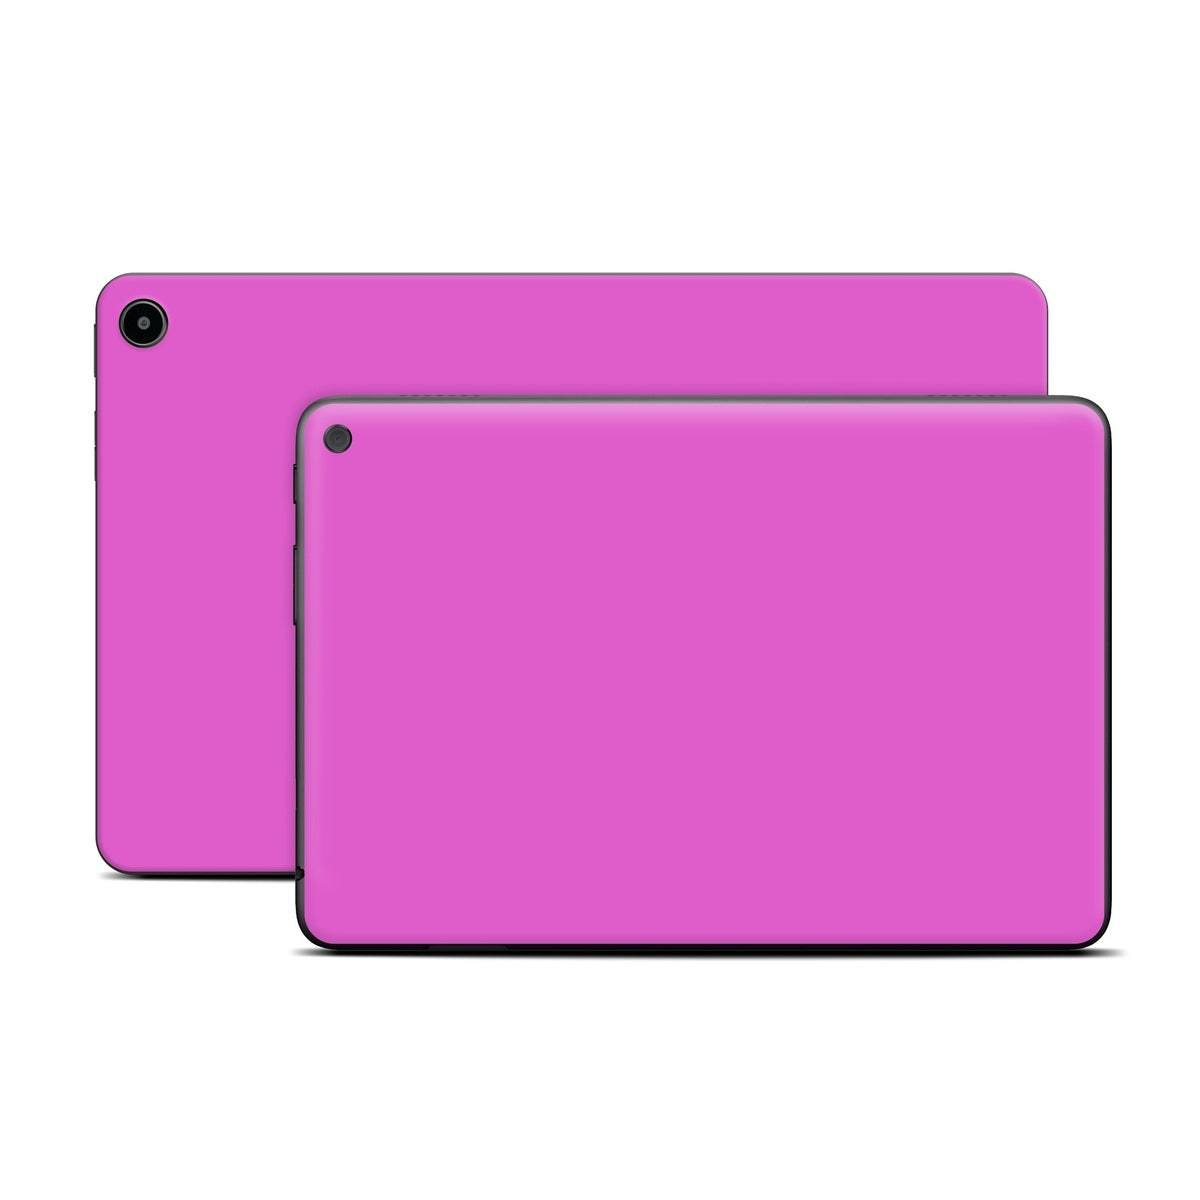 Solid State Vibrant Pink - Amazon Fire Skin